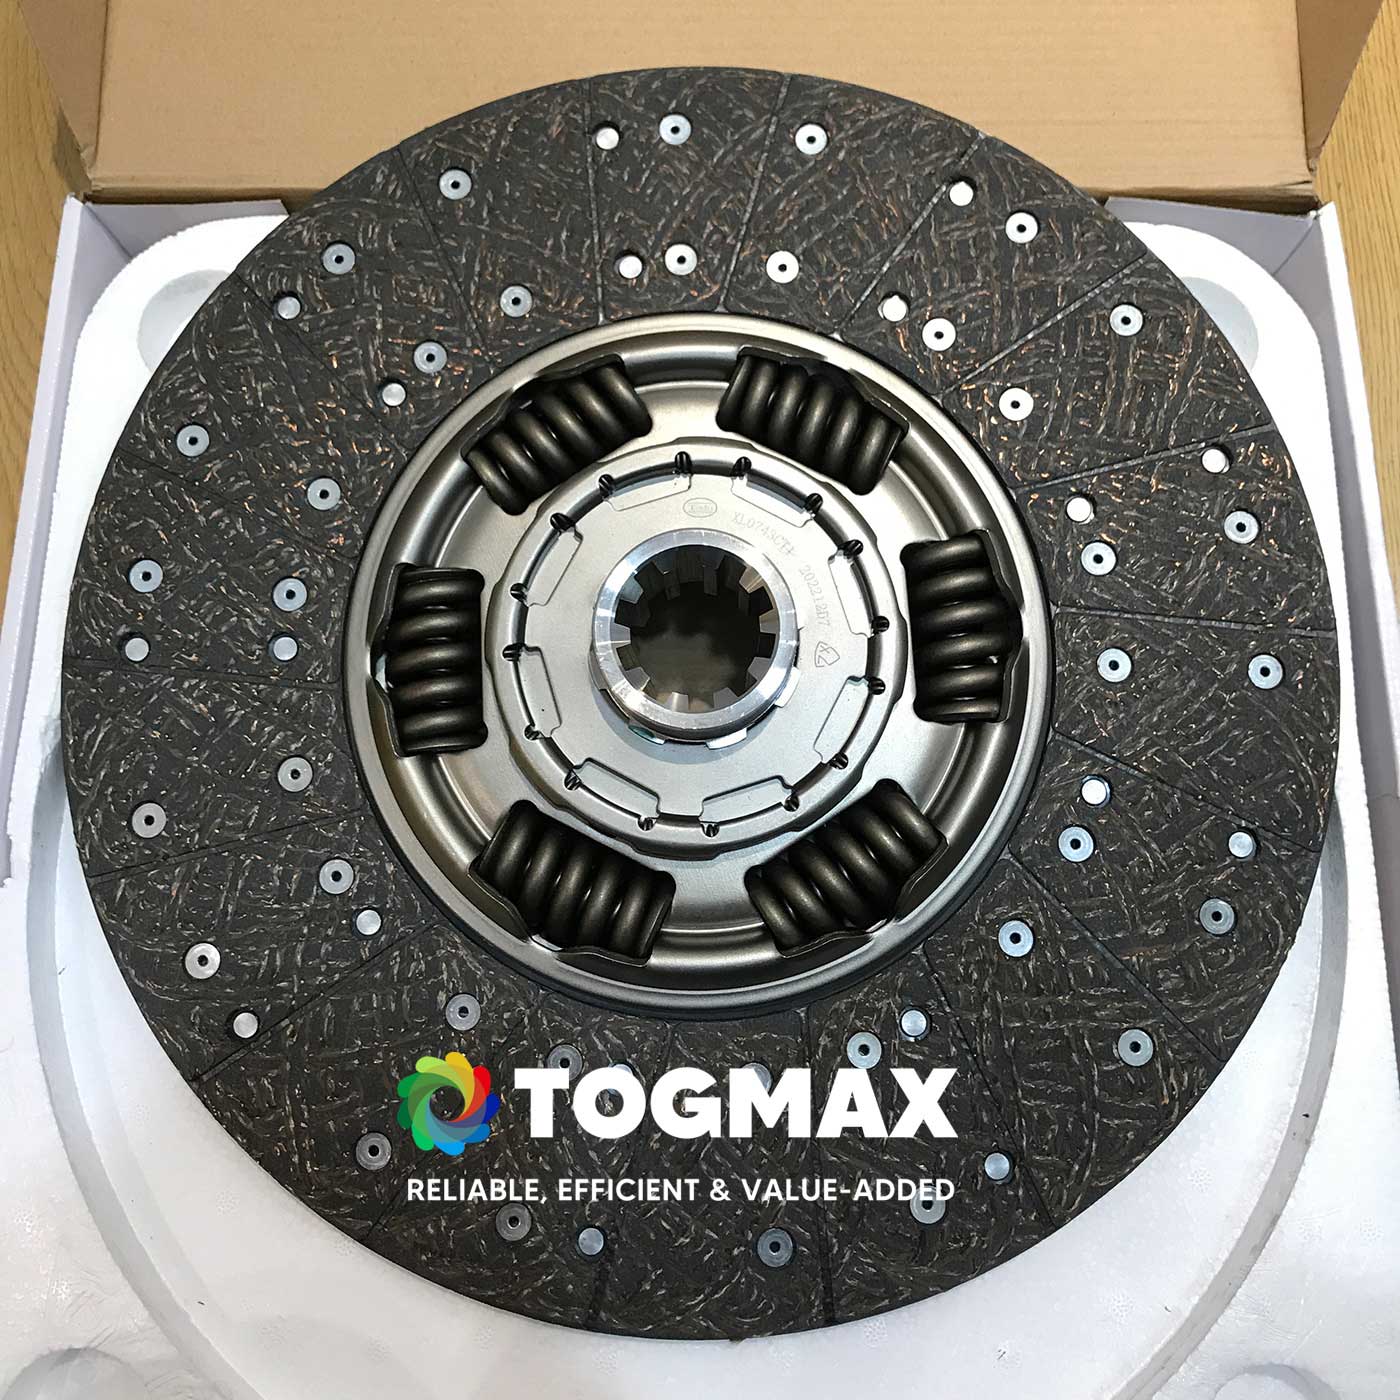 WIZEVER China Genuine Beiben Sinotruk Dongfeng 430 Clutch Disc Assembly 430x240x50.8-10